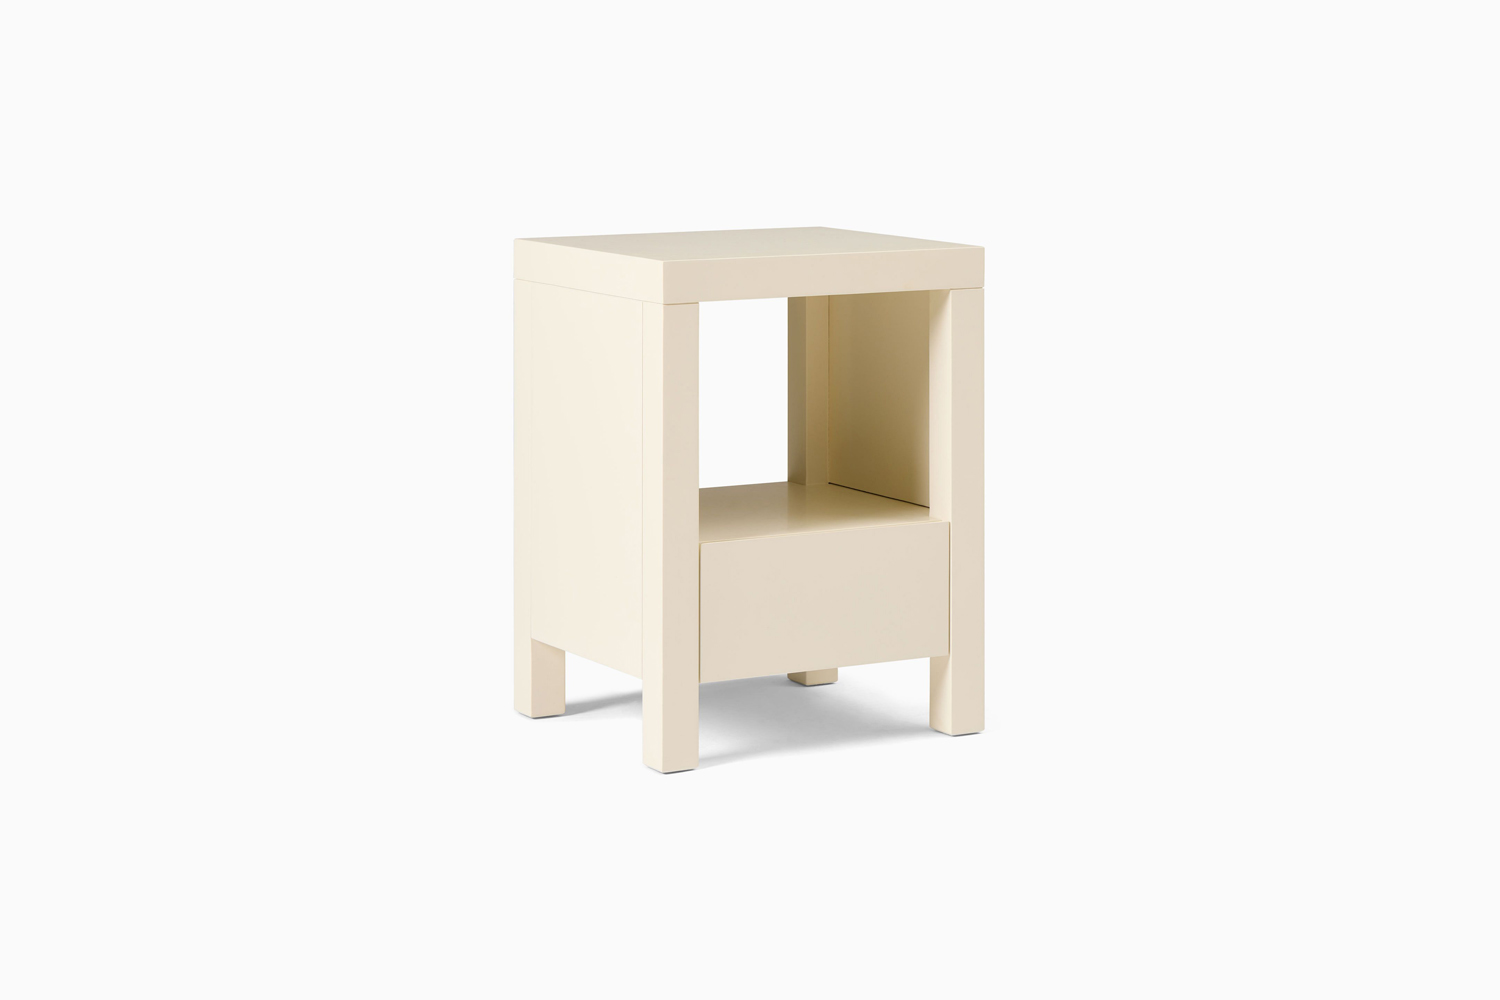 the parsons nightstand, shown in ivory, is \$349 at west elm. 19